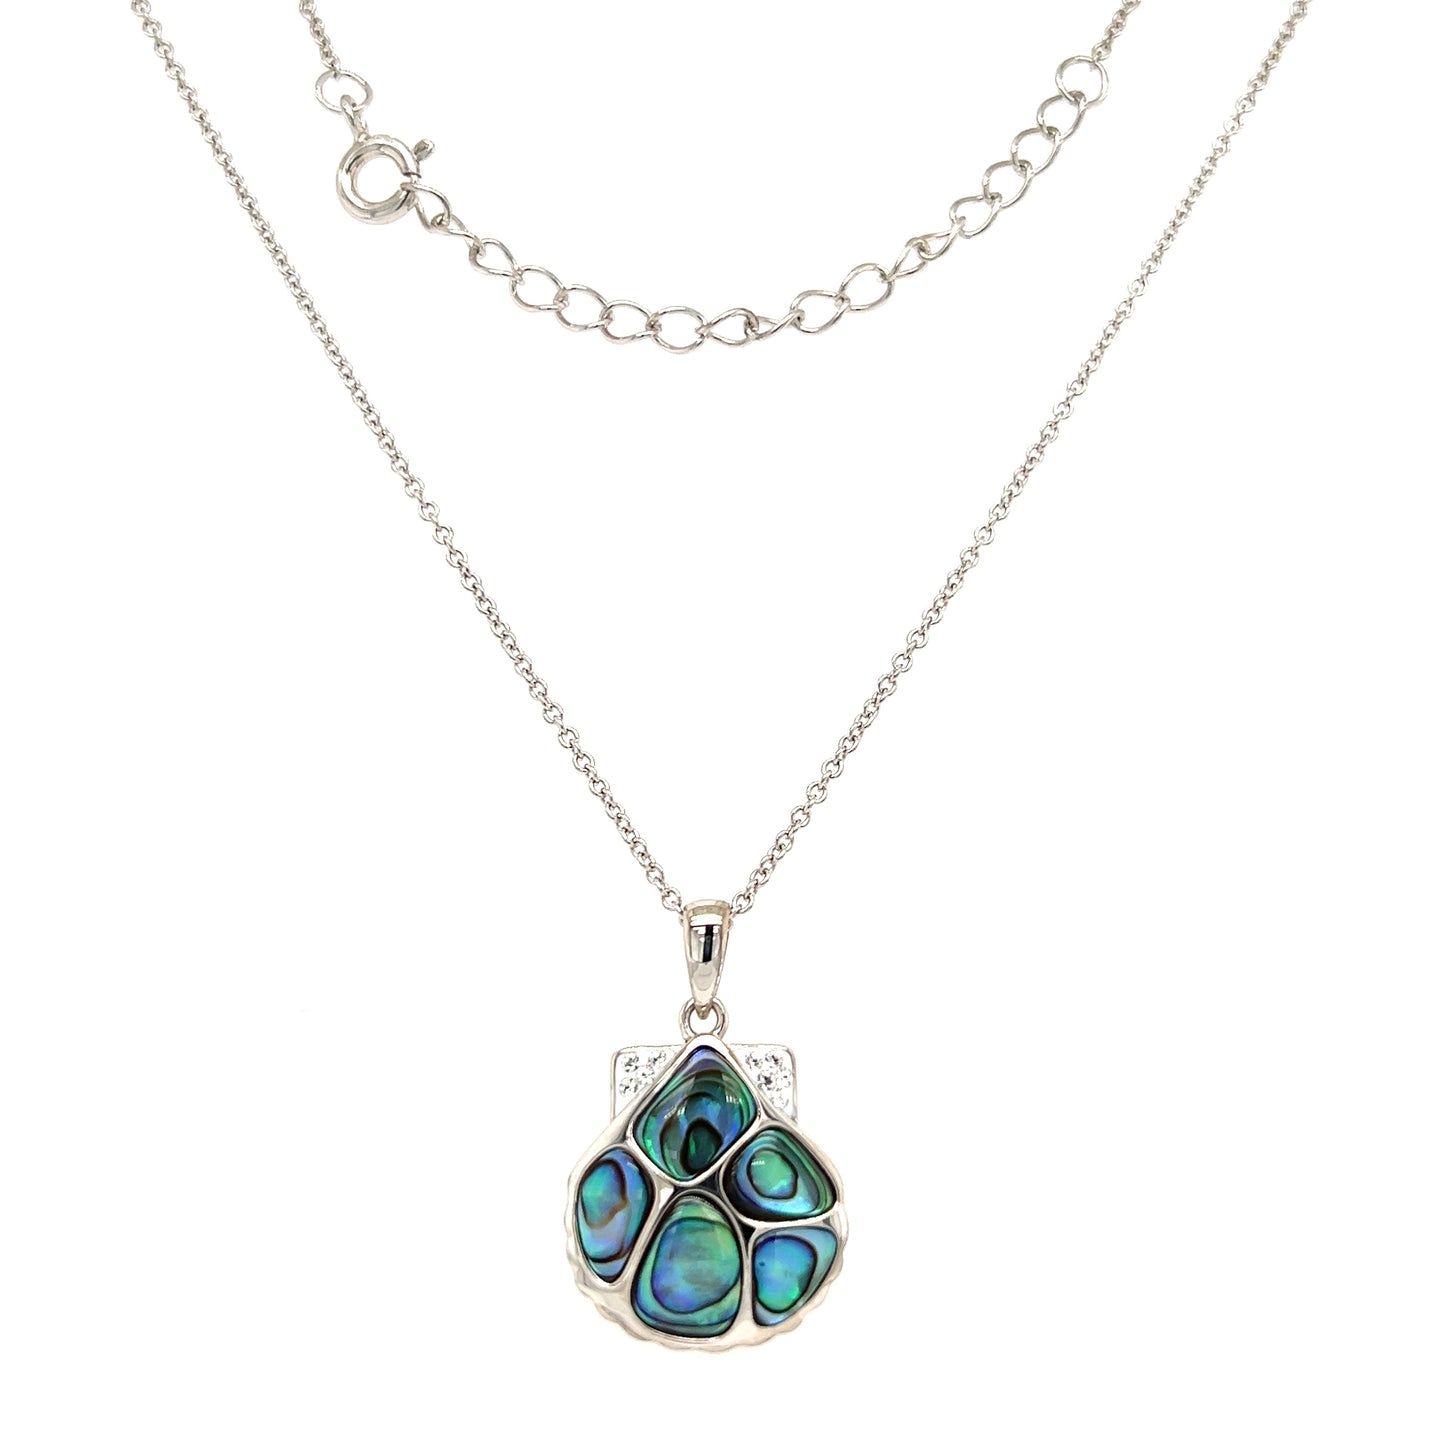 Clam Shell Necklace with Abalone Shell and Swarovski Crystals in Sterling Silver Full Necklace View